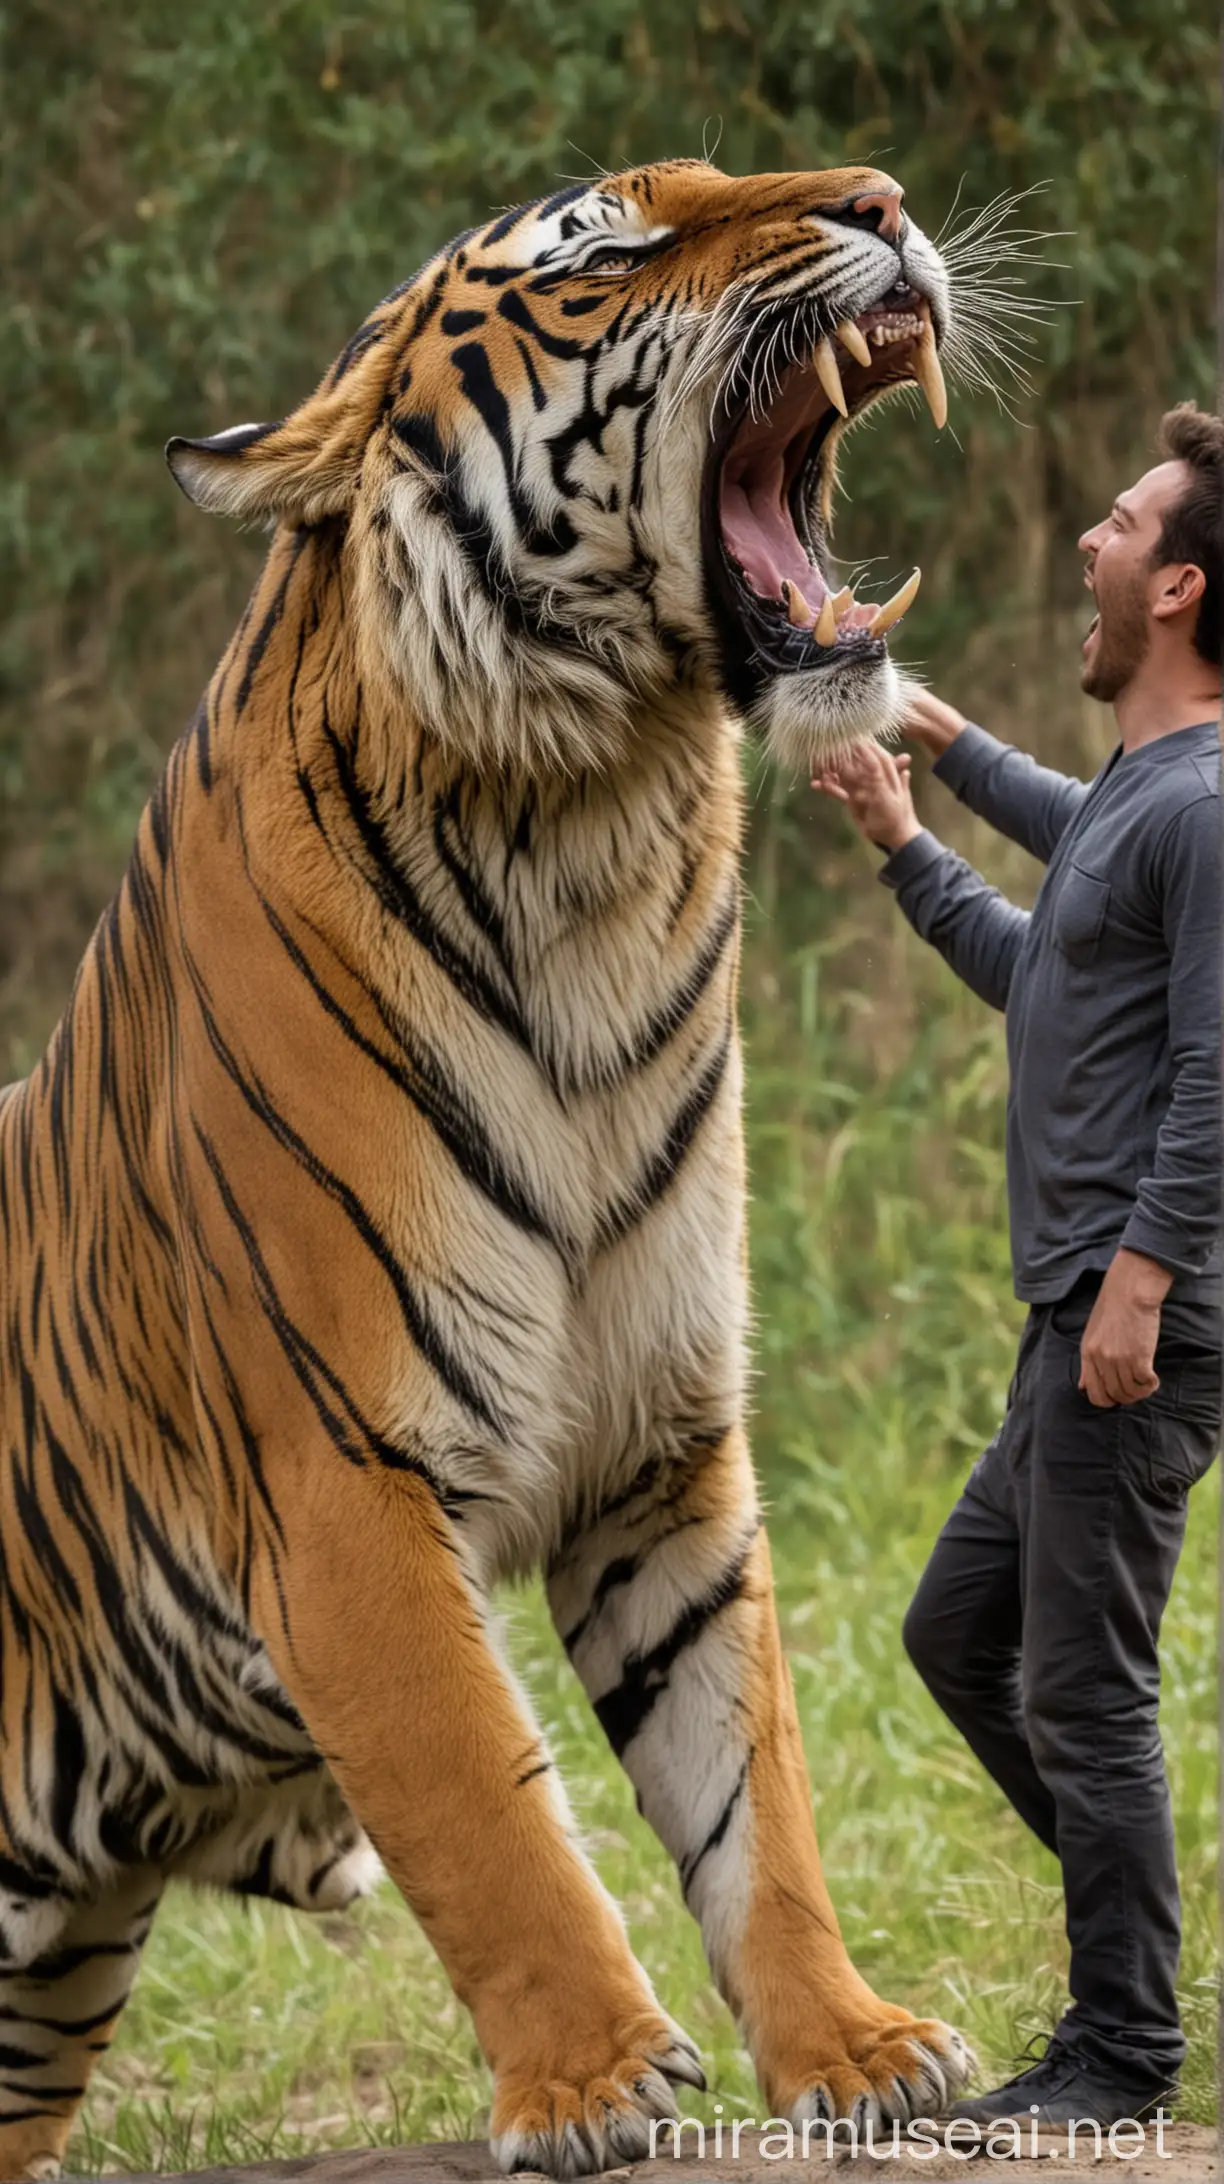 photo of a tiger roaring with a male human
